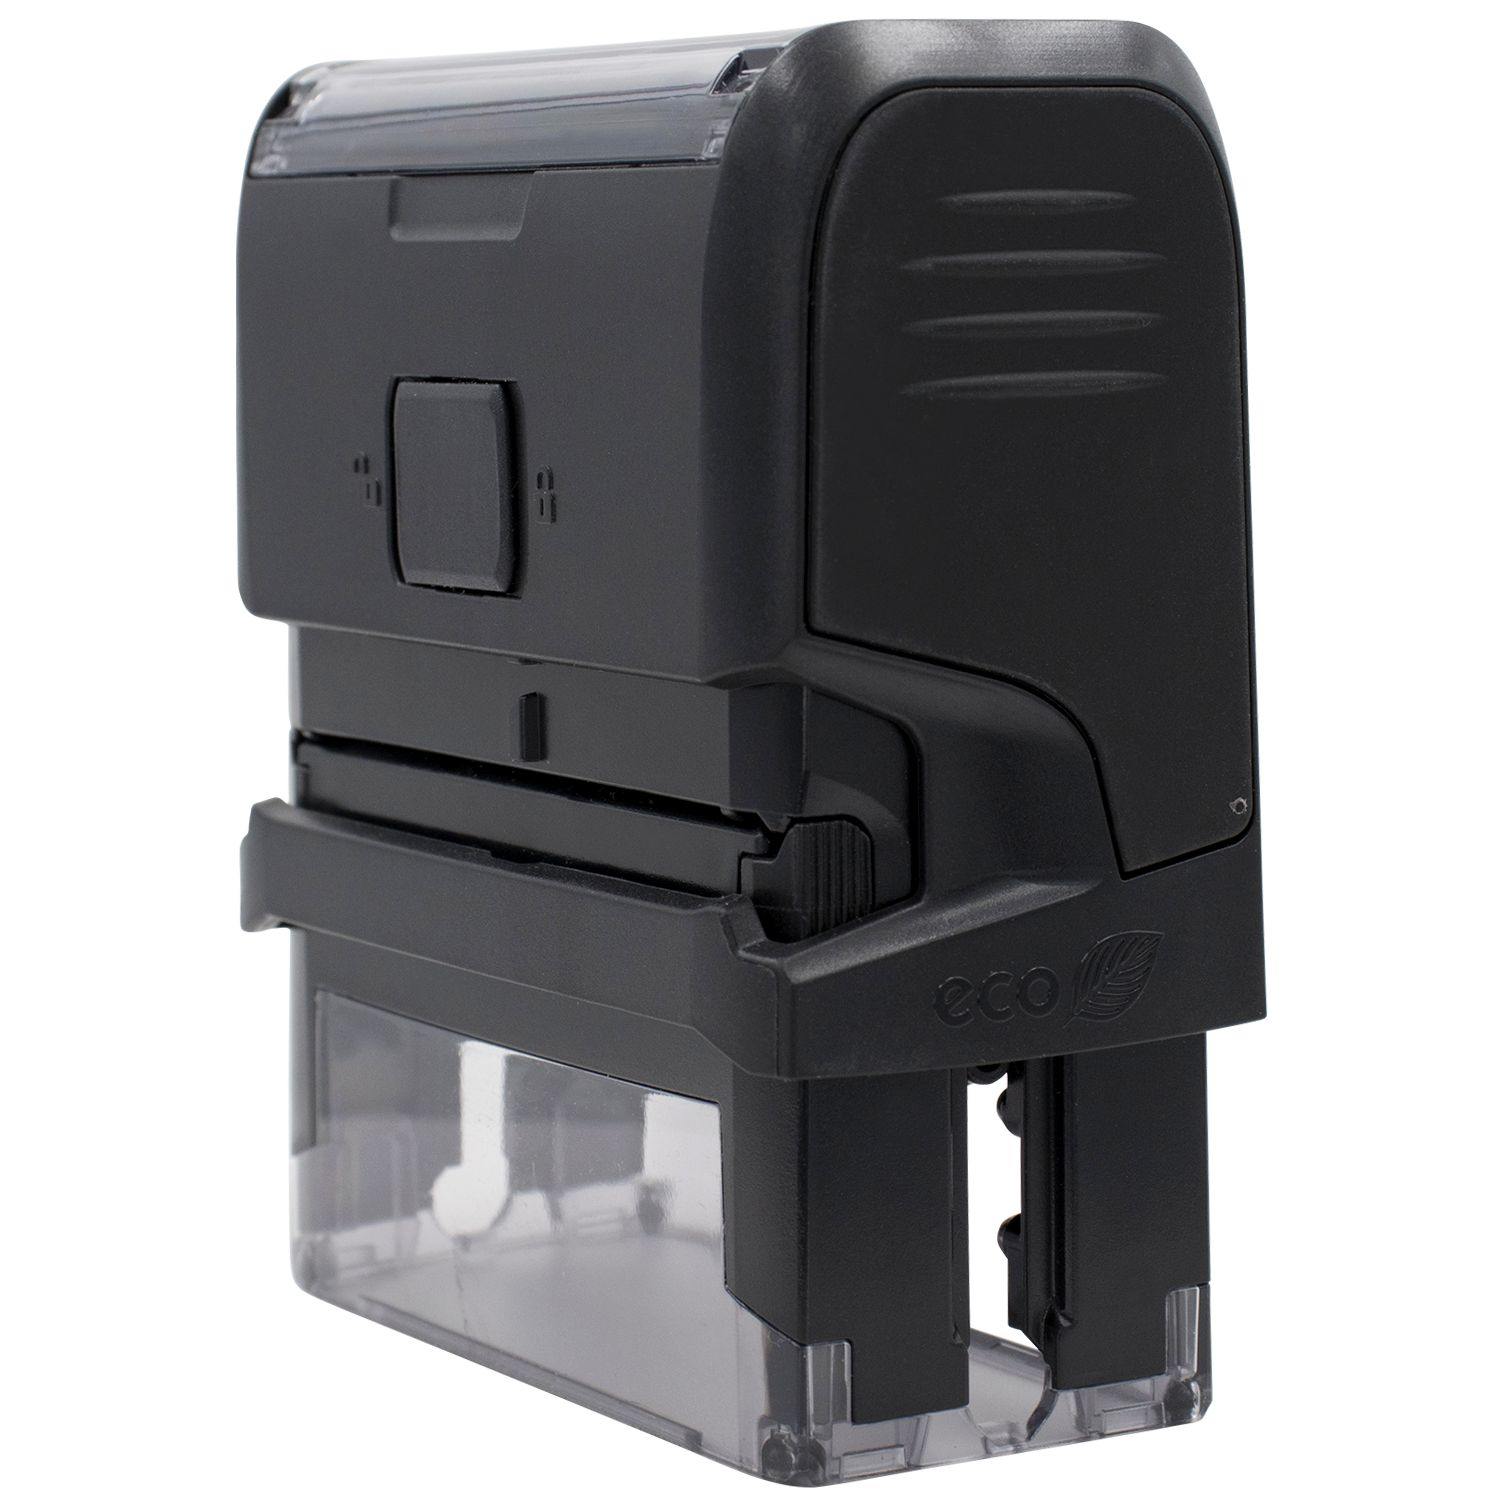 Side View of Large Self-Inking Archivado Stamp at an Angle